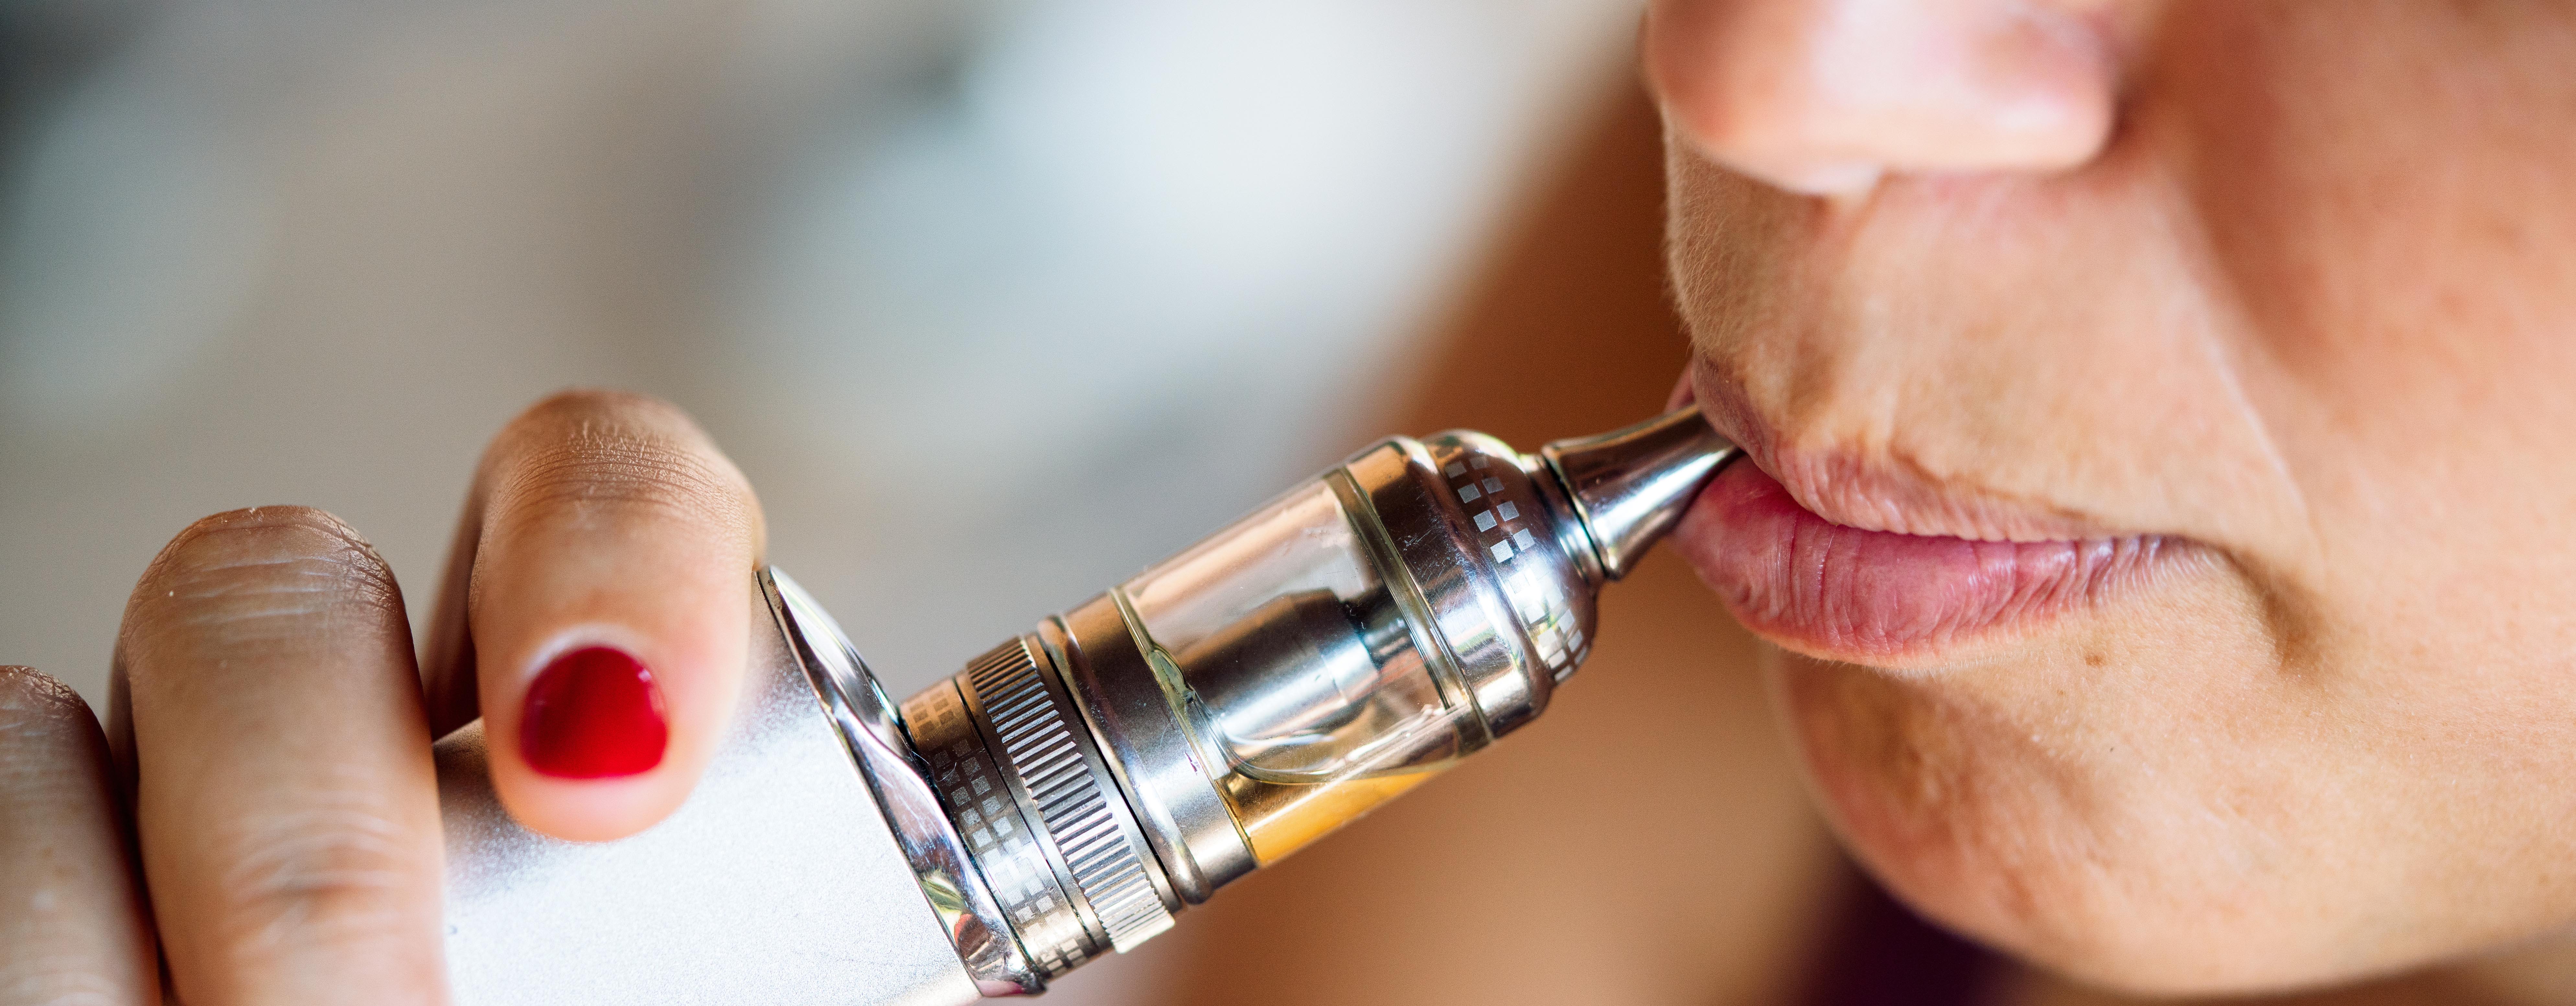 What You Can Do to Keep Your Kids From Vaping